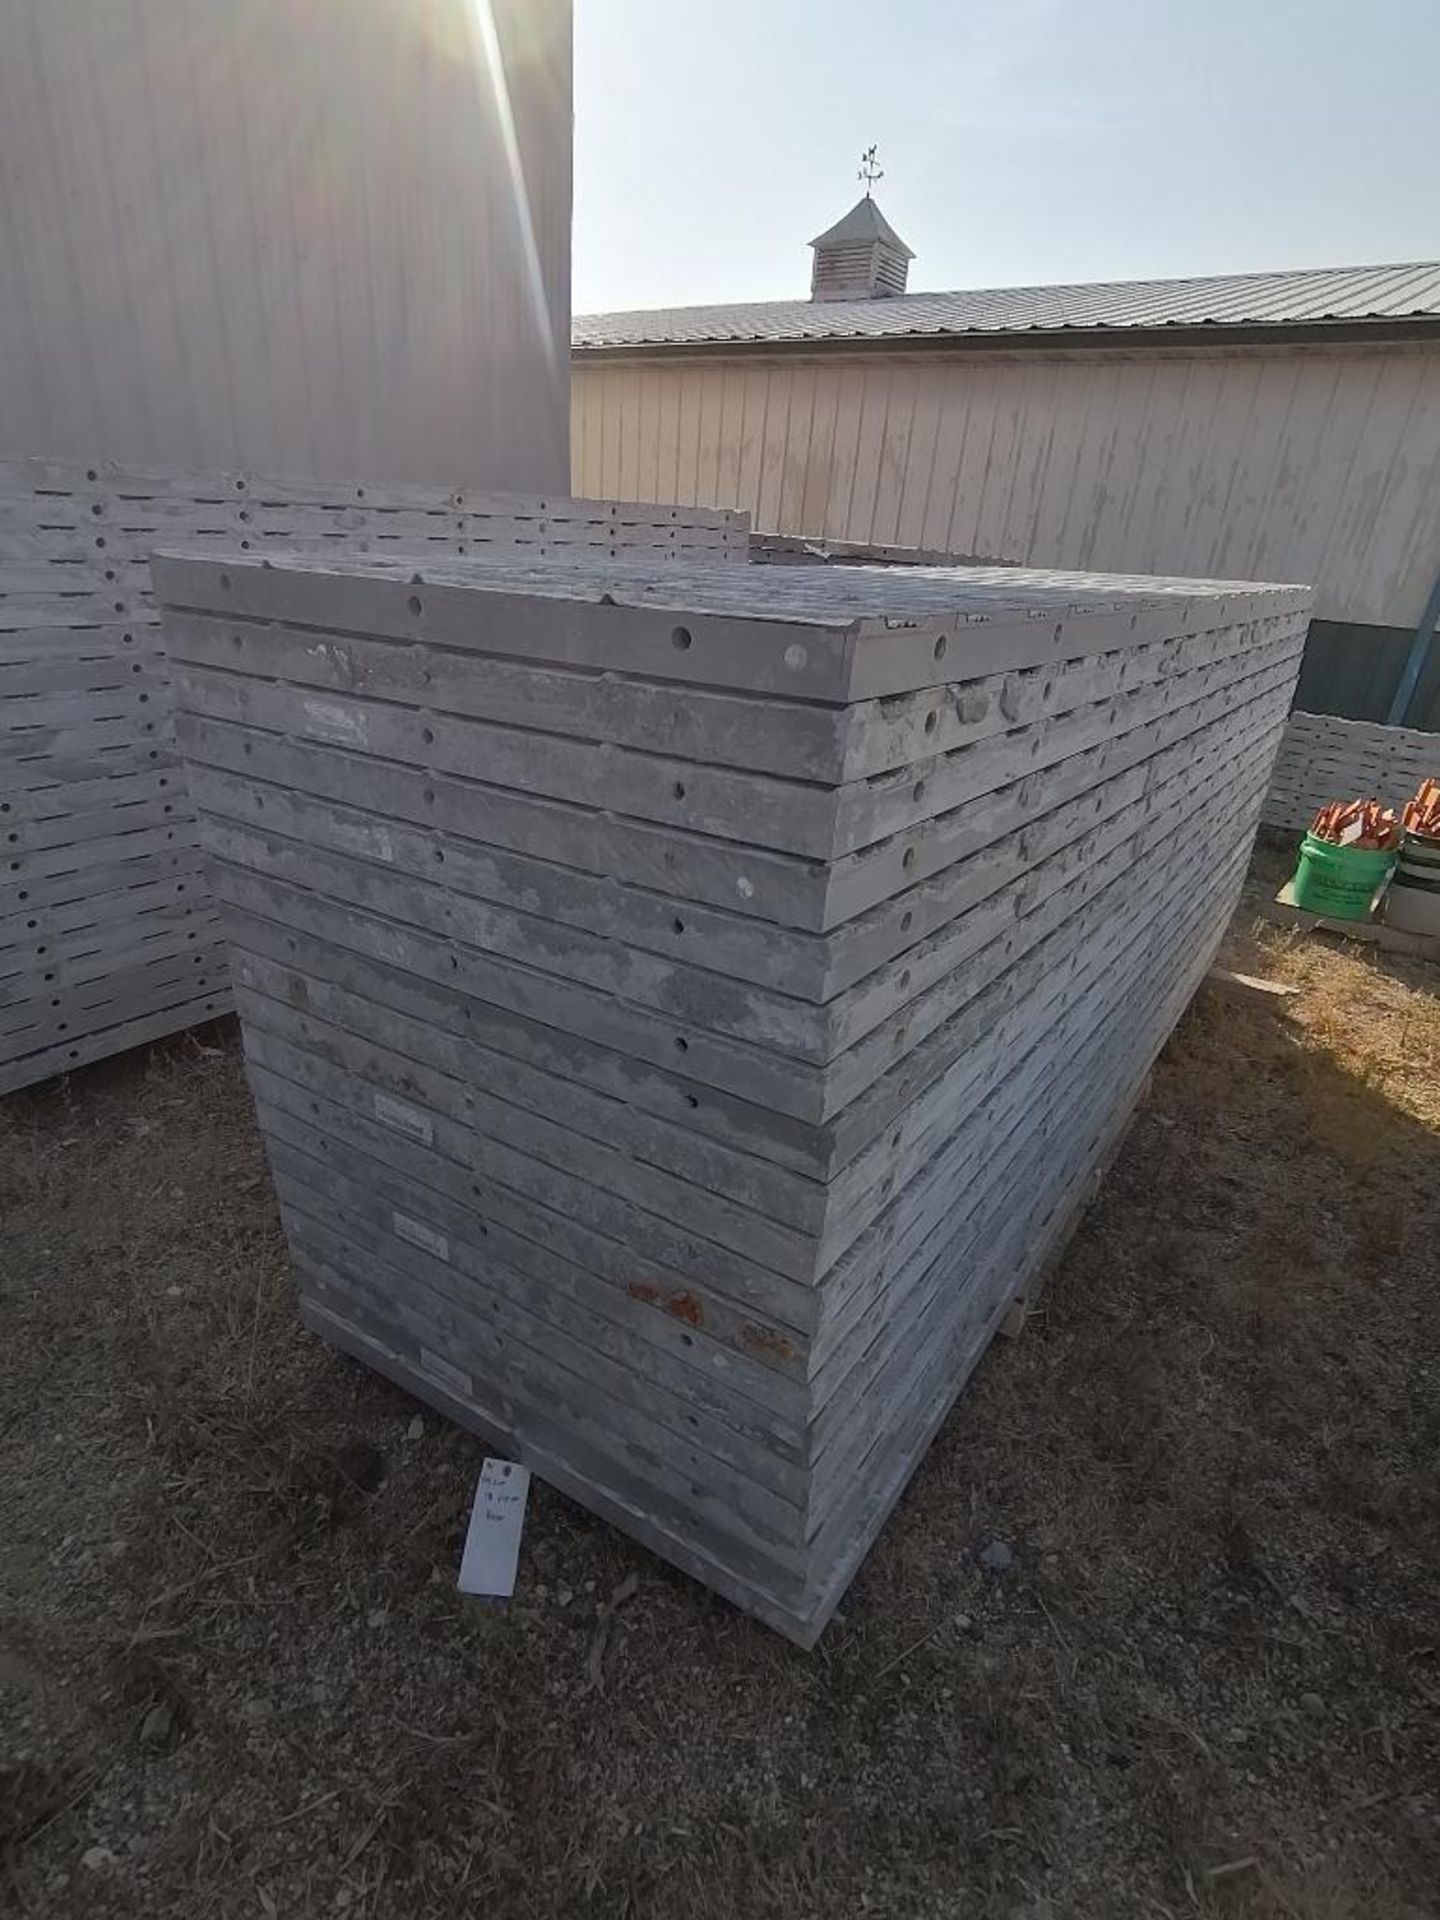 (19) 36" x 9' Precise Textured Brick Aluminum Concrete Forms 6-12 Hole Pattern. Located in Woodbine, - Image 2 of 7